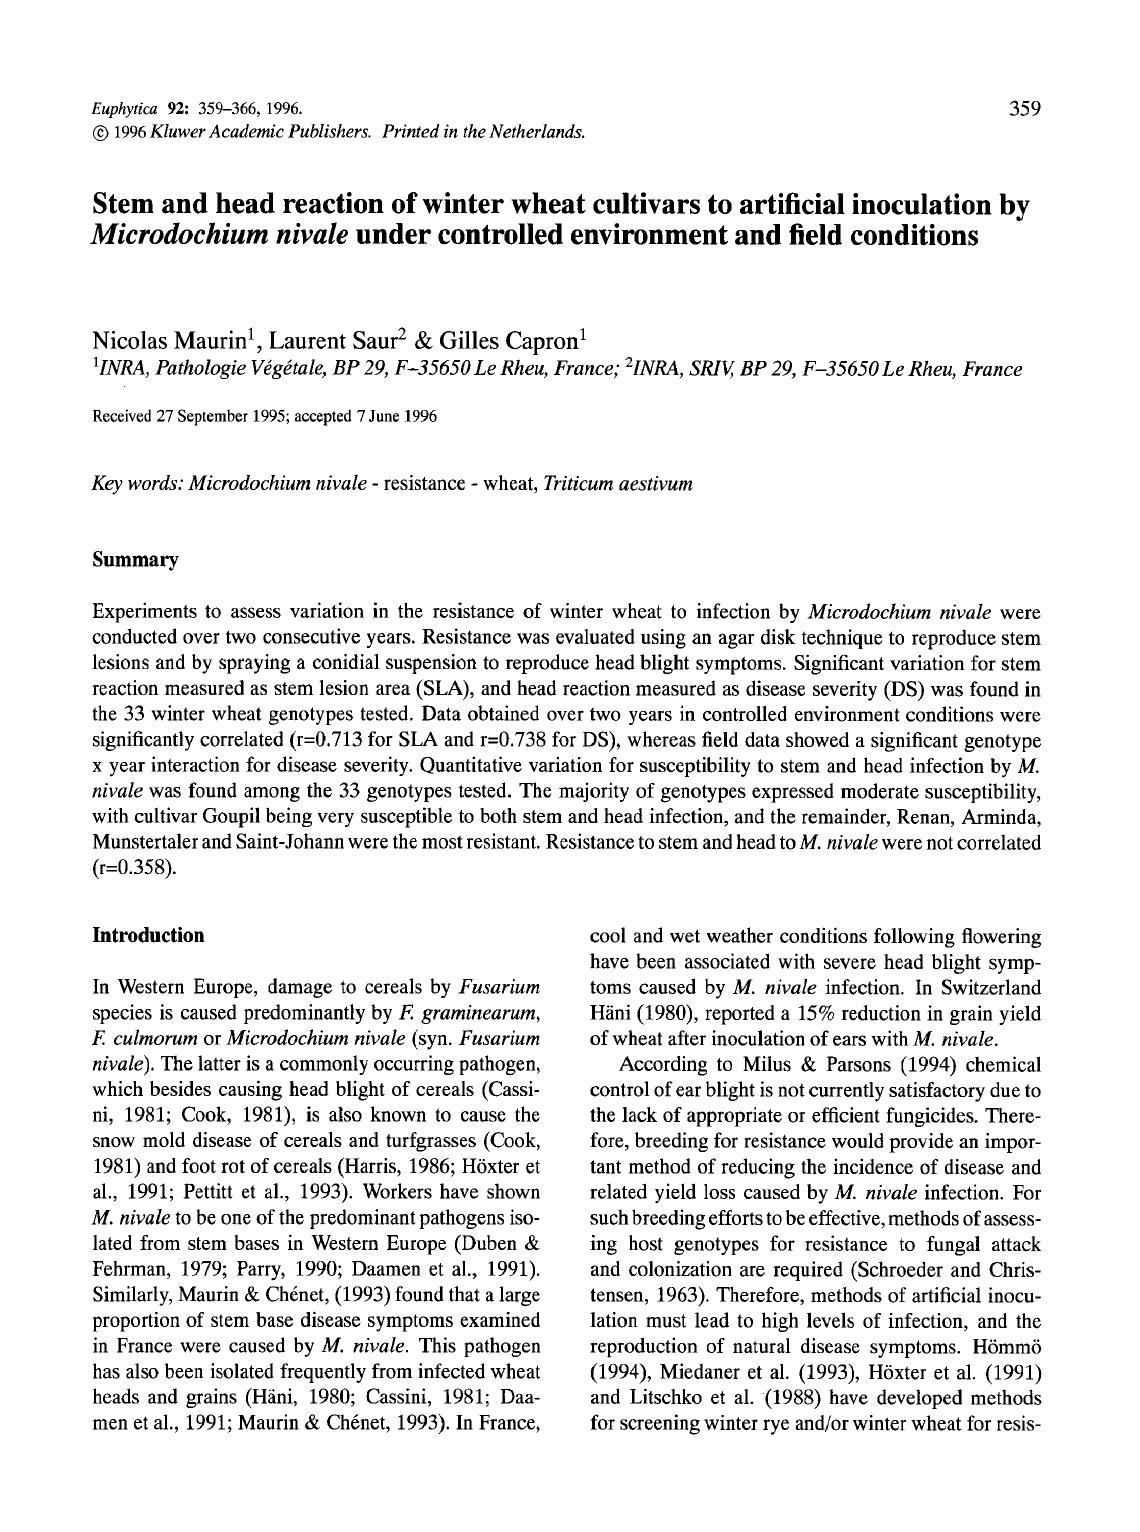 Stem and head reaction of winter wheat cultivars to artificial inoculation by <Emphasis Type="Italic">Microdochium nivale <Emphasis> under controlled environment and field conditions by Unknown